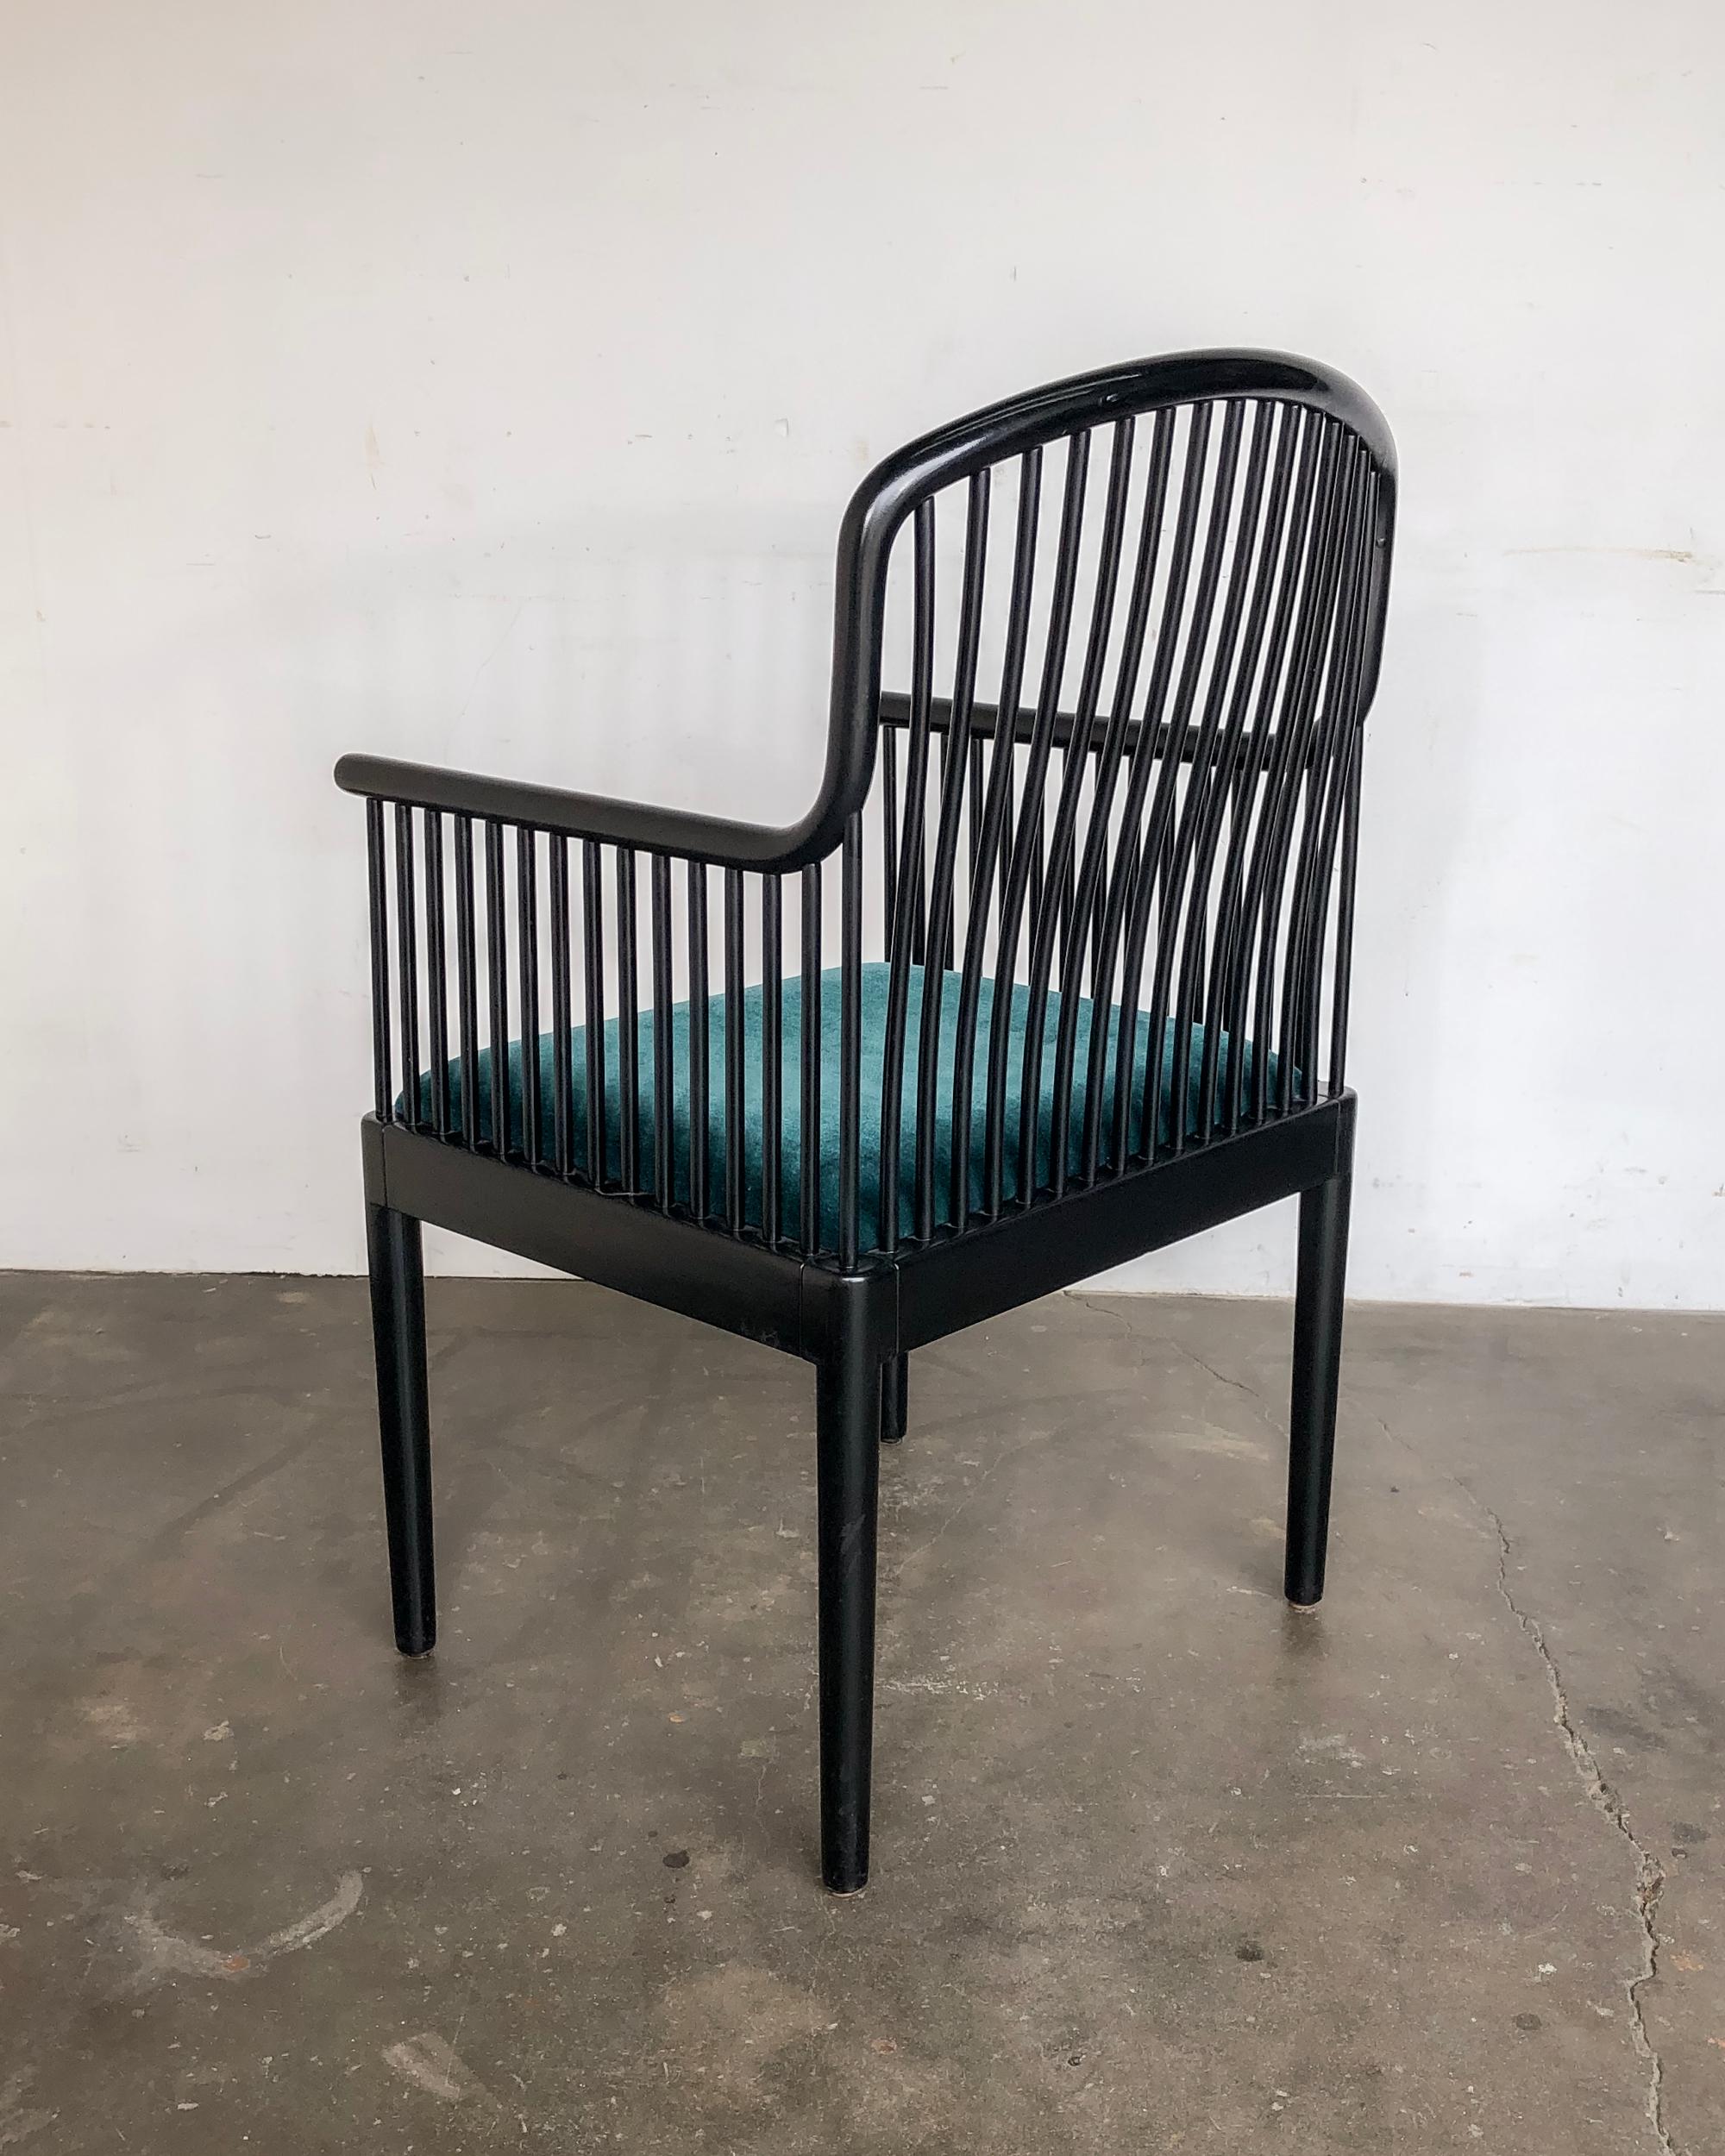 Rare Andover chair designed by Allen Davis for Stendig made in Italy circa 1980. Classic design with bent wood spindles in black lacquer and original emerald green velvet upholstery. Overall great vintage condition, some light wear to lacquer